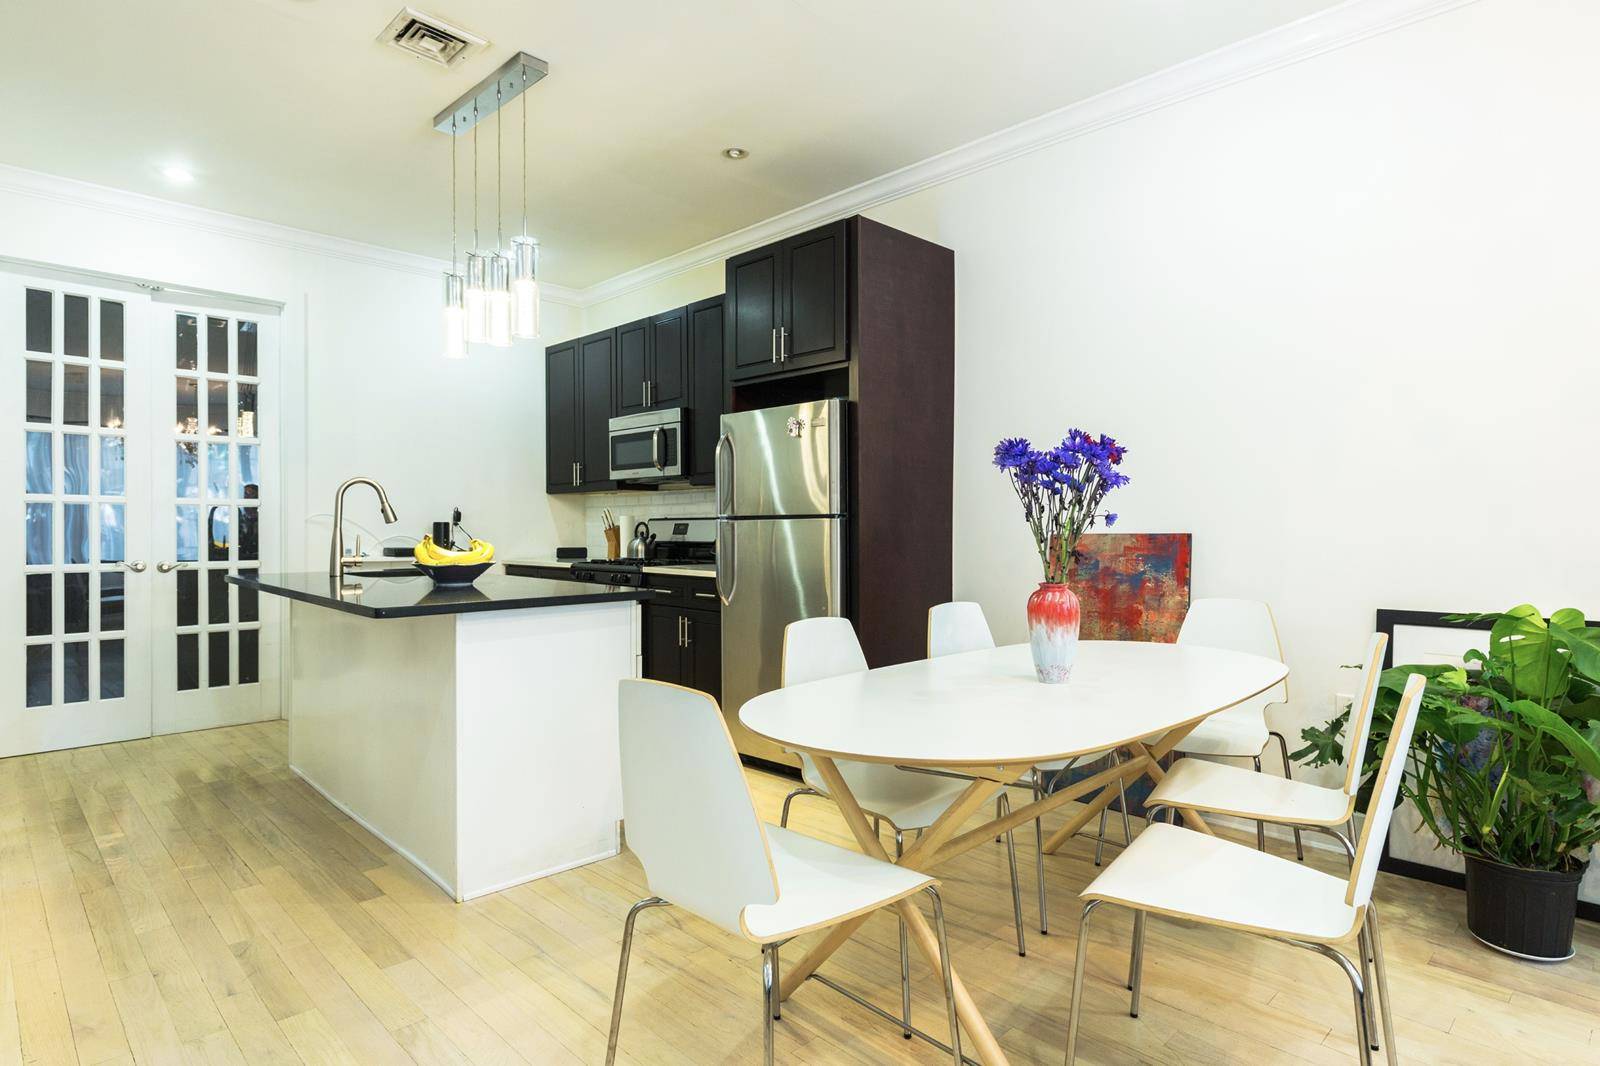 This fully renovated two family townhouse comes fully equipped with brand new plumbing, electrical, and luxury finishes.